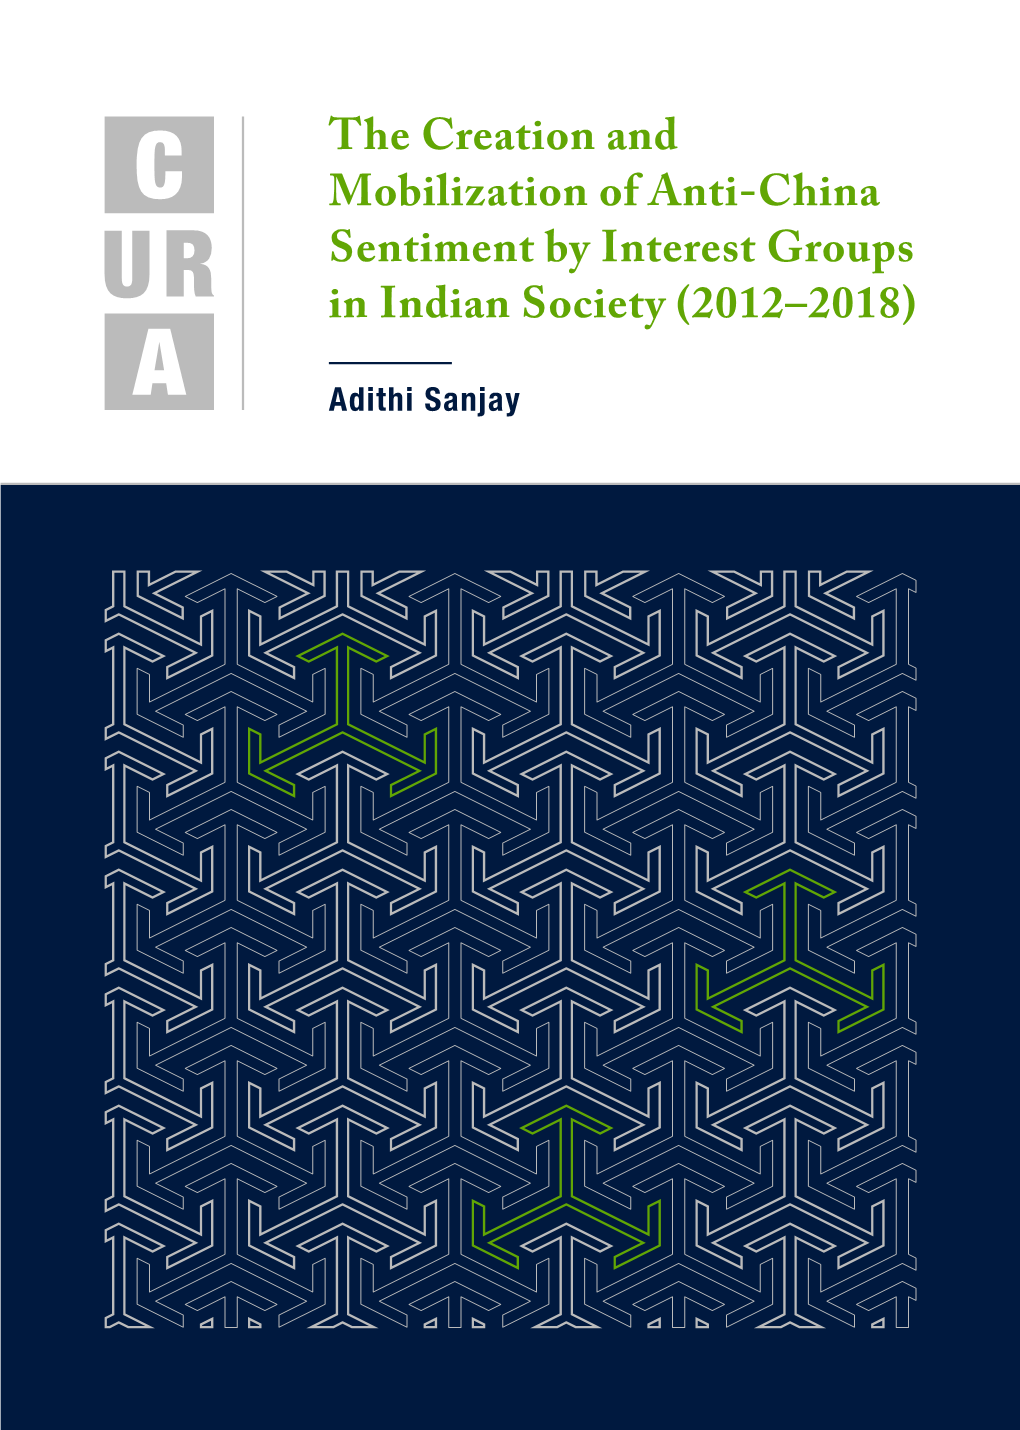 The Creation and Mobilization of Anti-China Sentiment by Interest Groups in Indian Society (2012–2018)